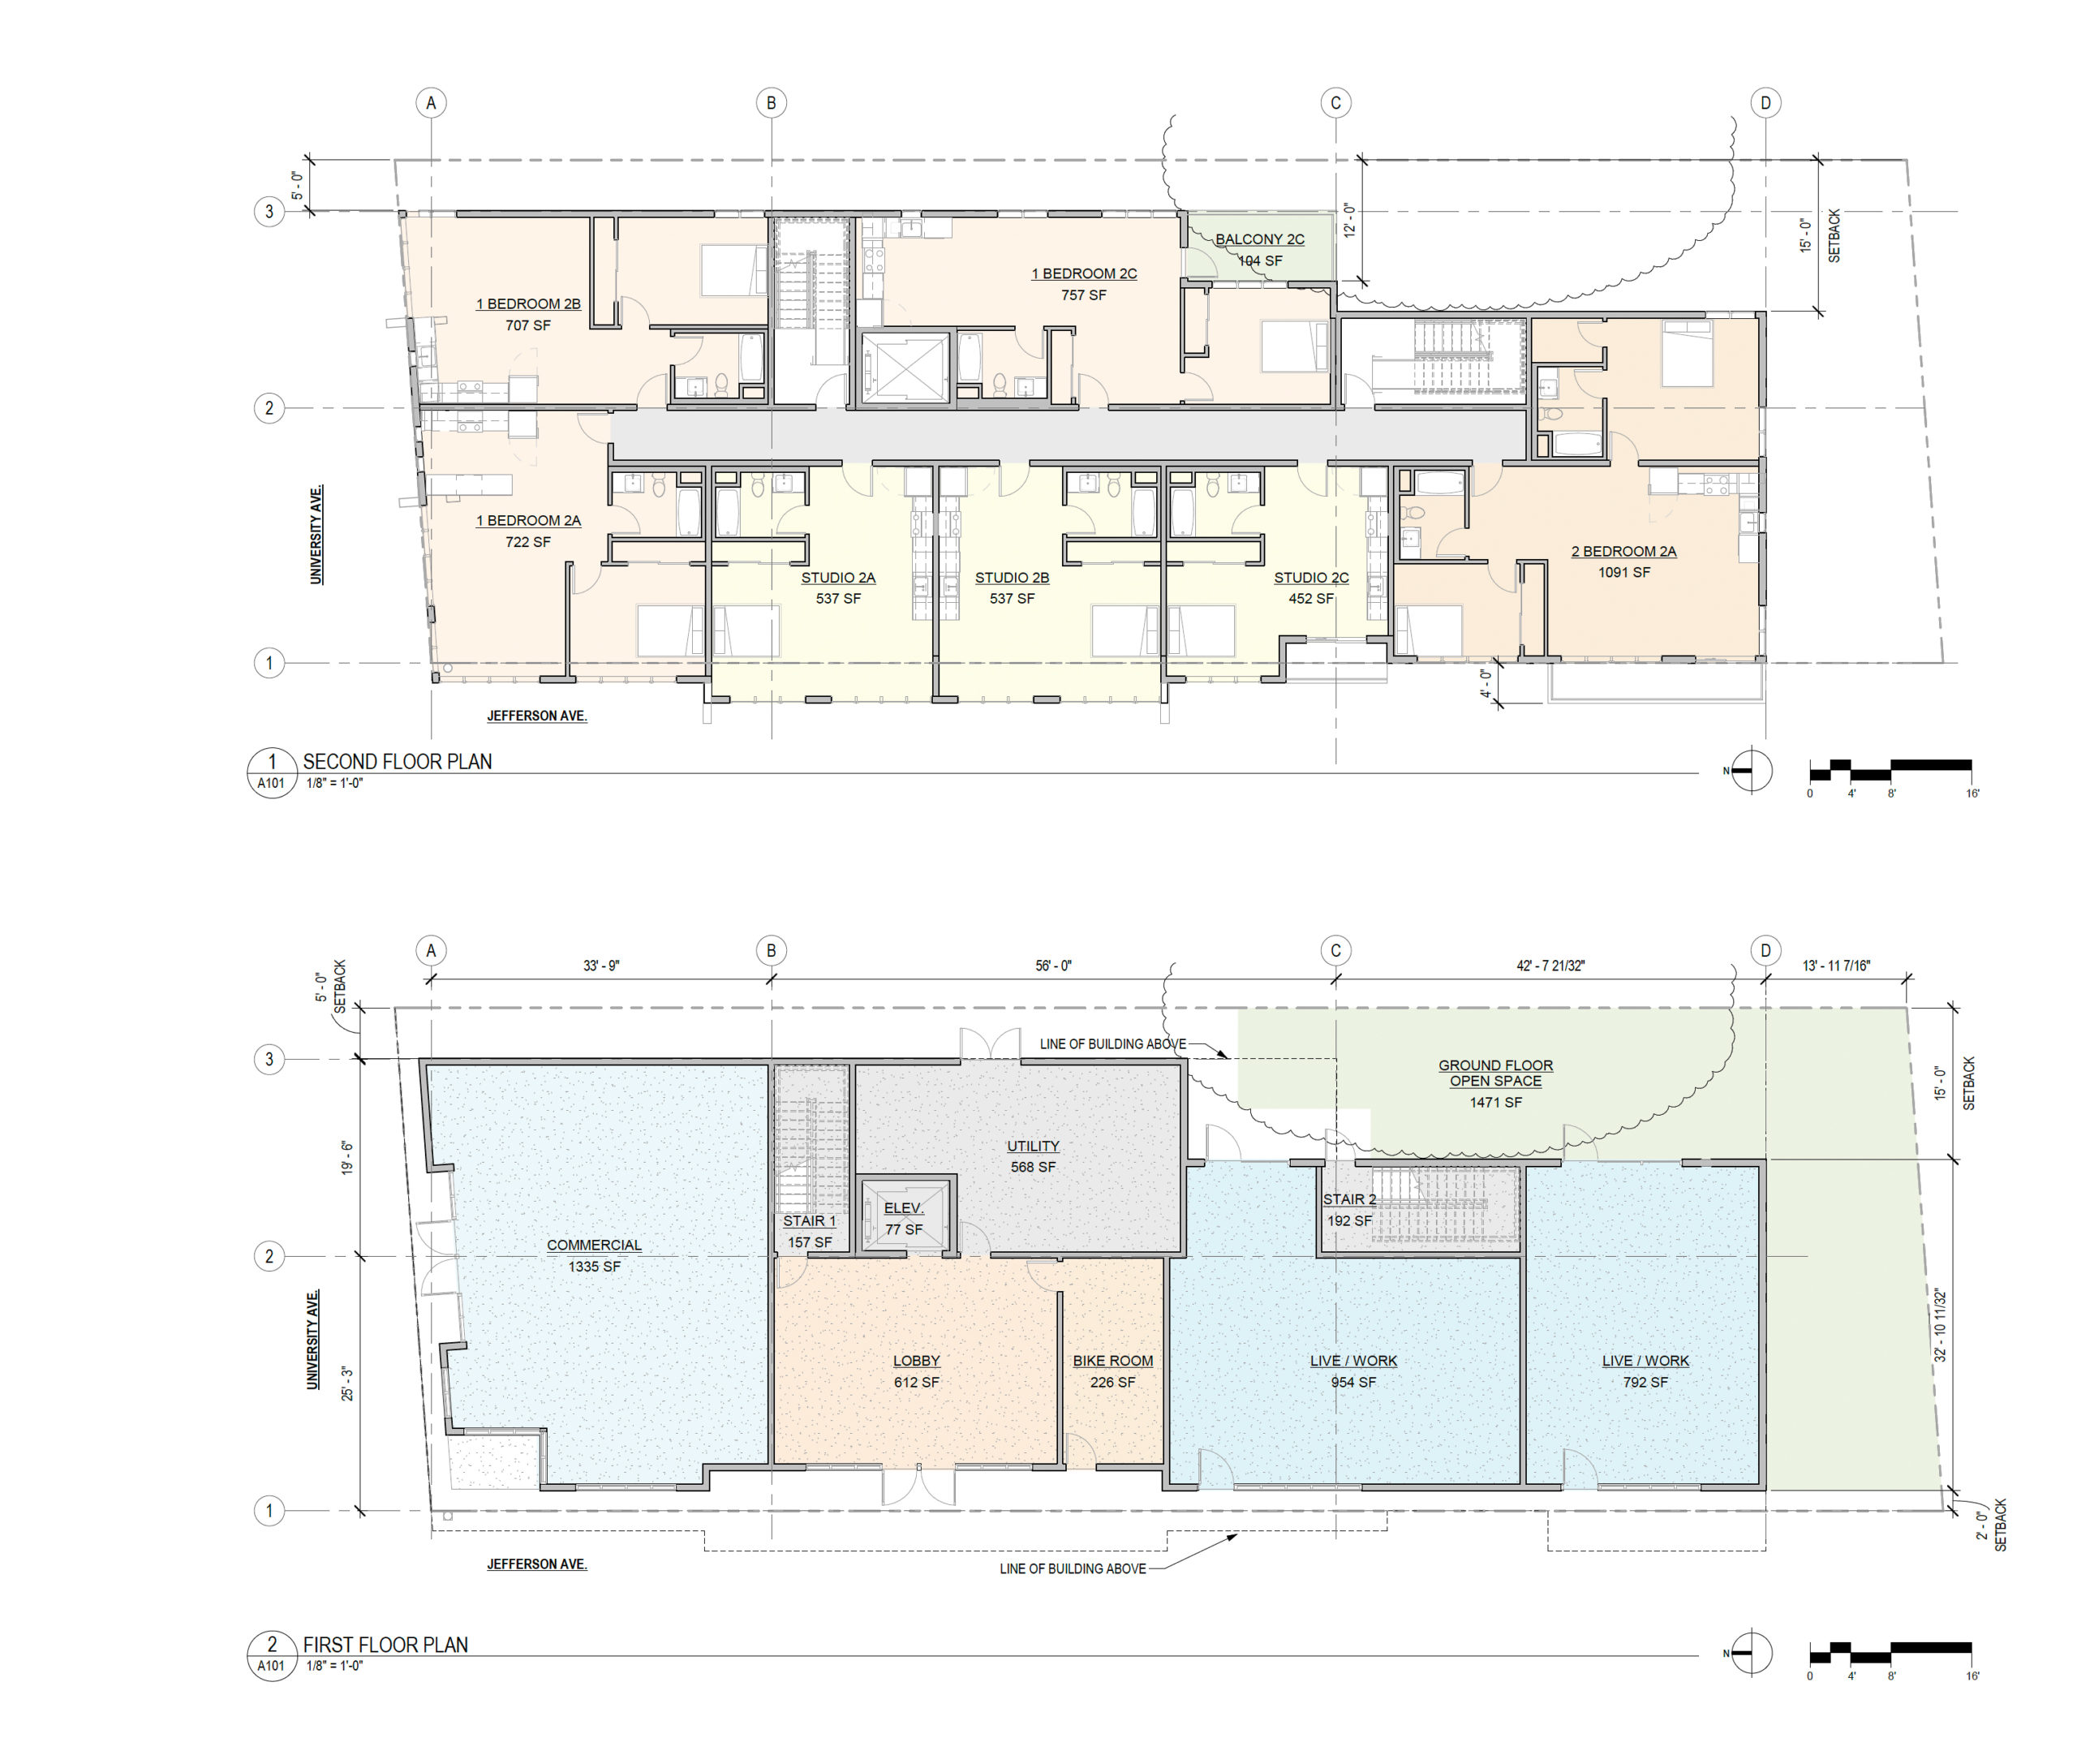 1652 University Avenue floor plans for levels one and two, by Studio KDA